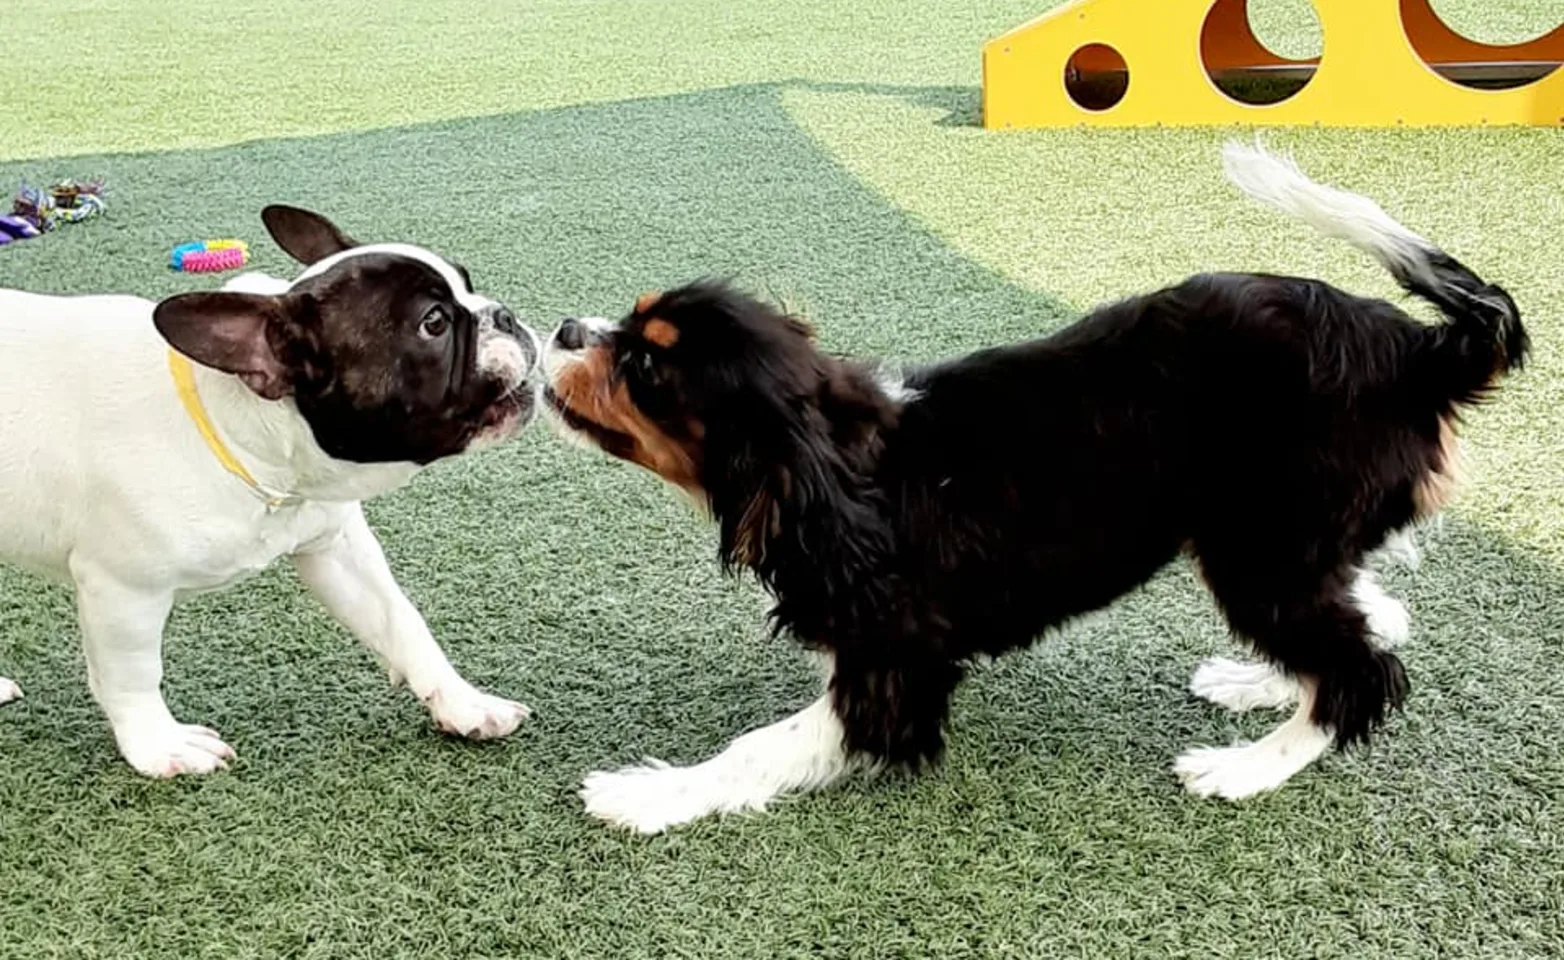  Puppies sniffing each other